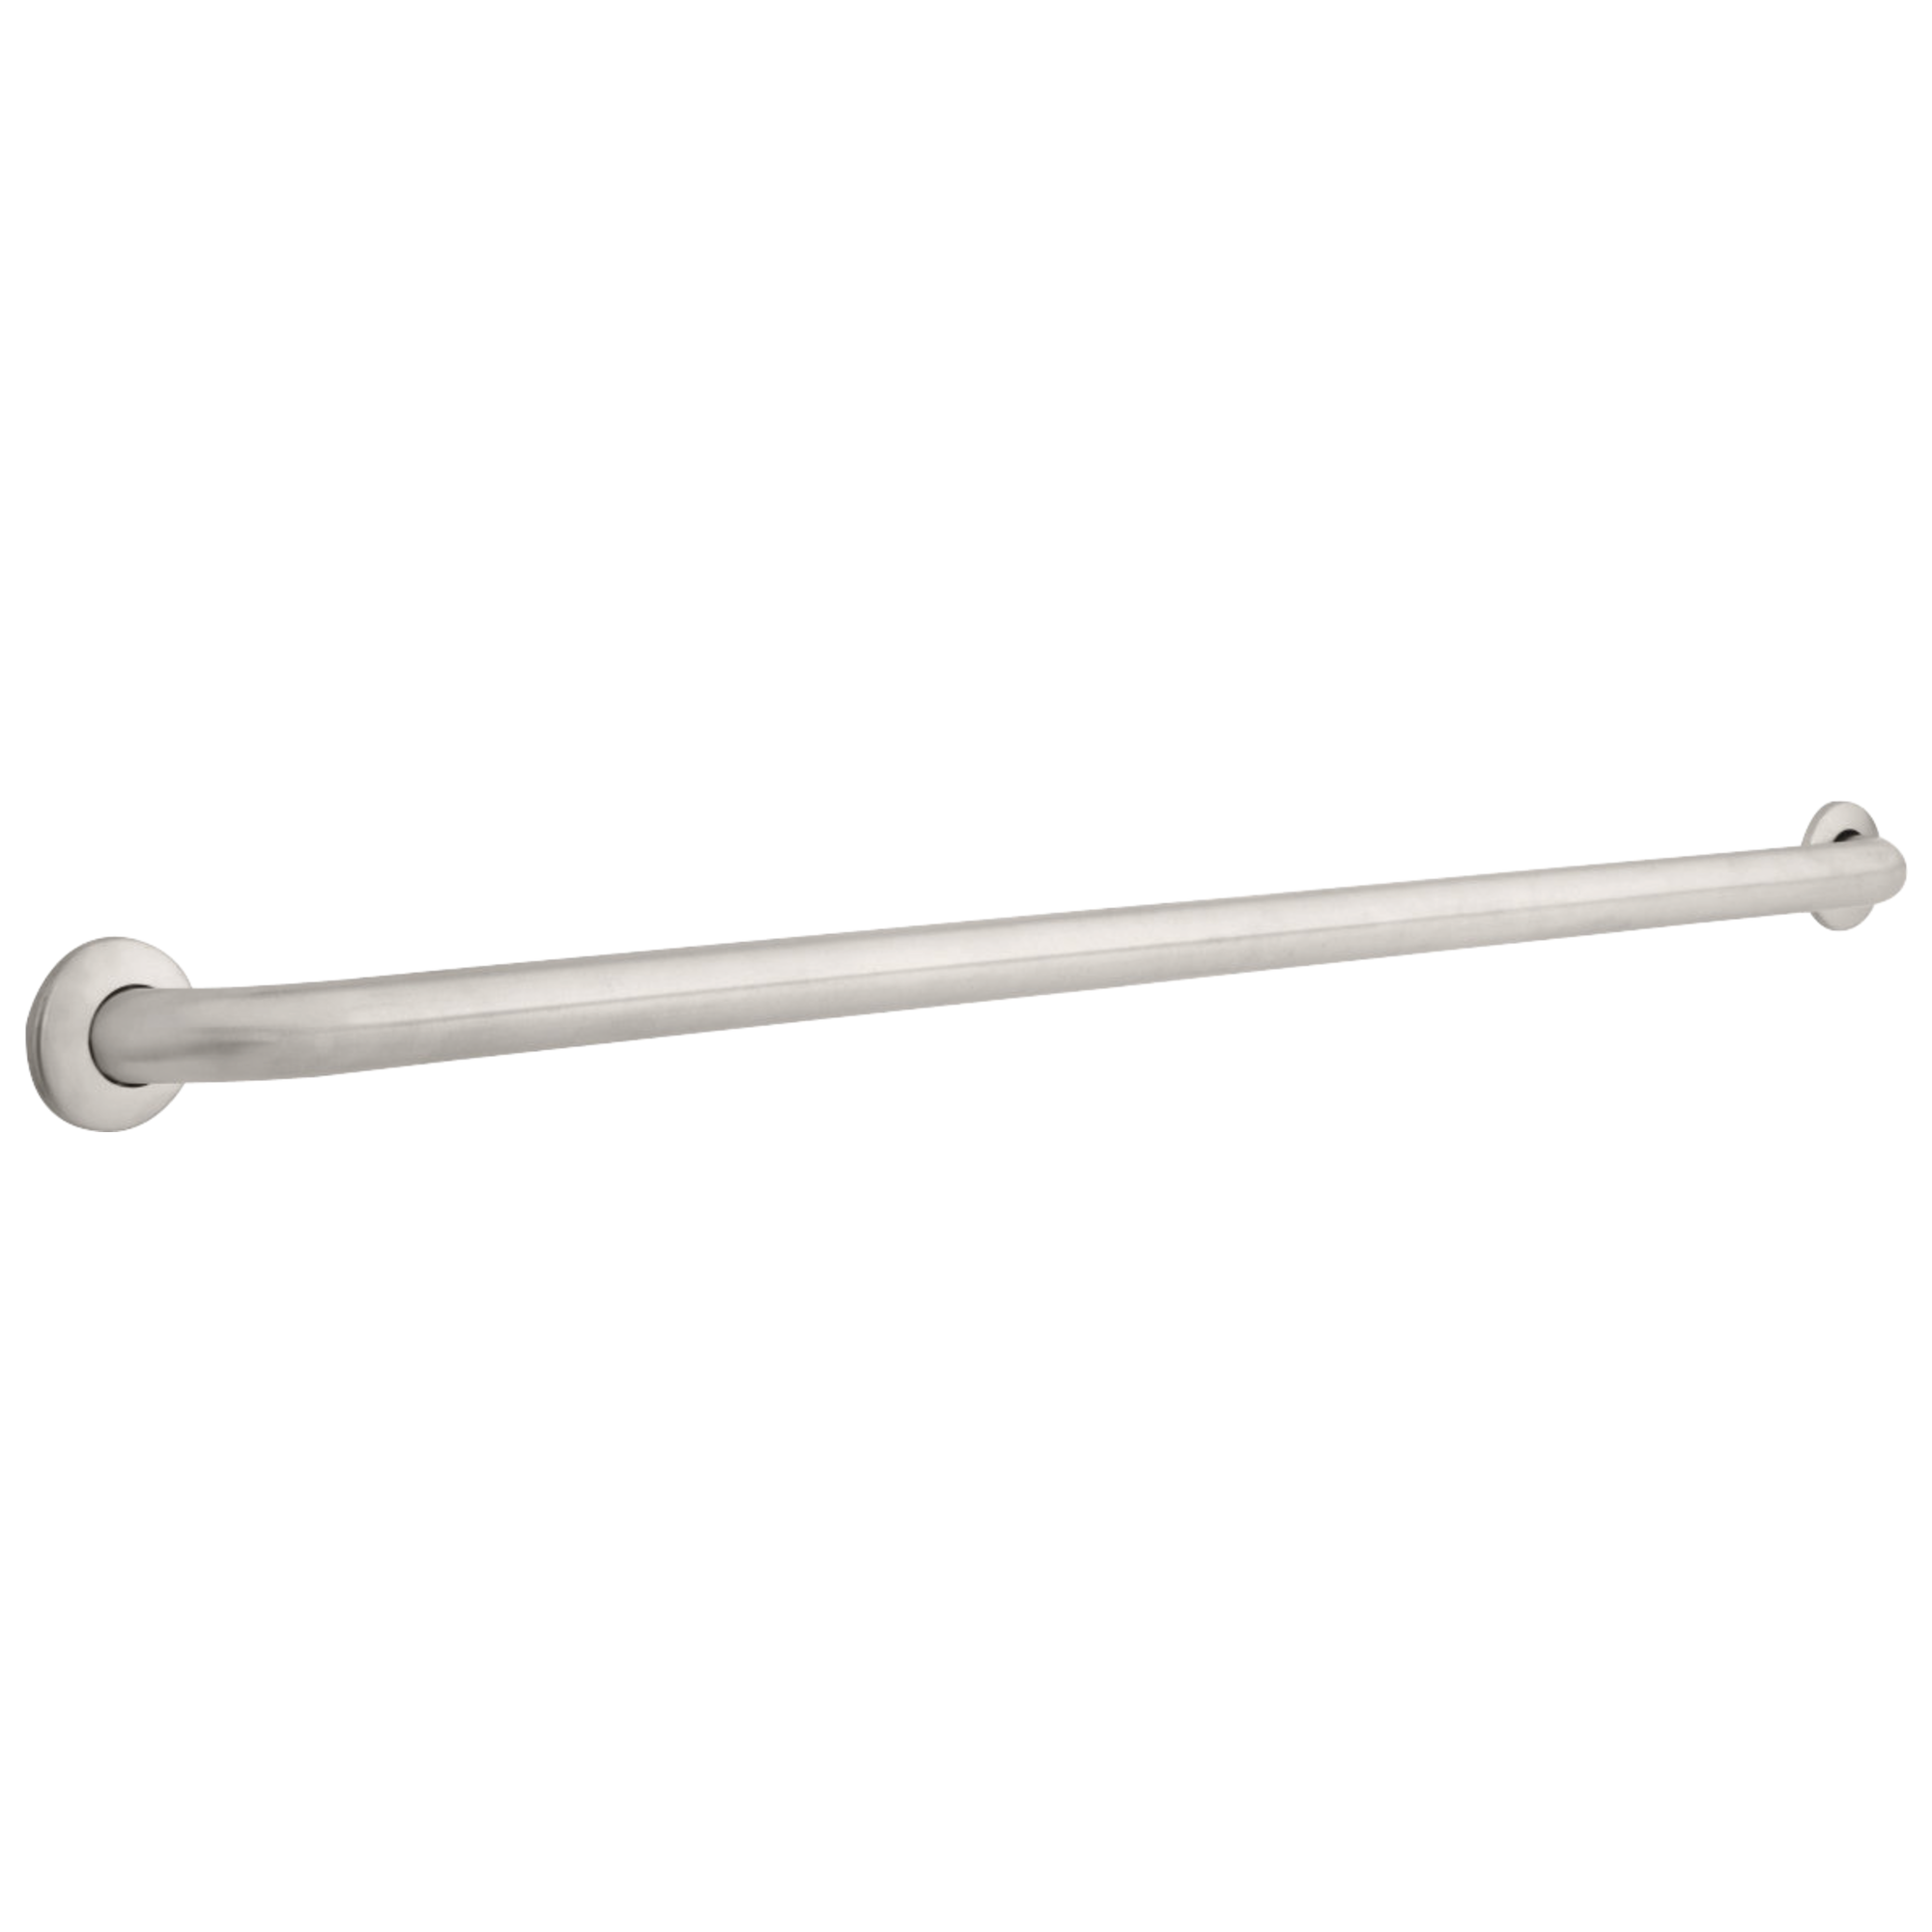 Delta Commercial Other: 1-1/2" x 48" ADA Grab Bar, Concealed Mounting